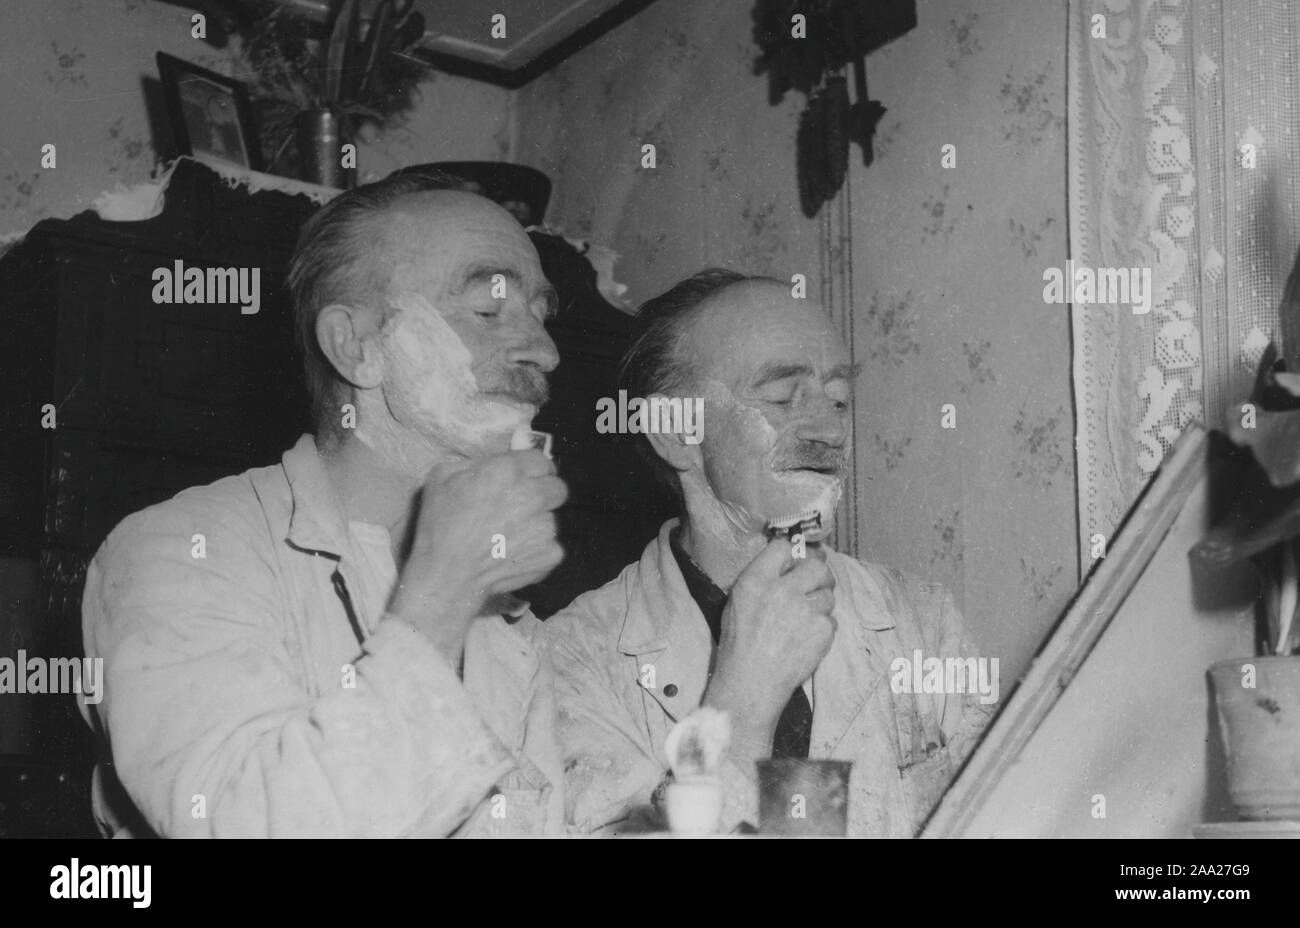 Identical twins. The brothers Erik and Otto Nilsson from Malmö. They both work as painters and are doing their morning shave before going to work. Sweden 1950s Stock Photo